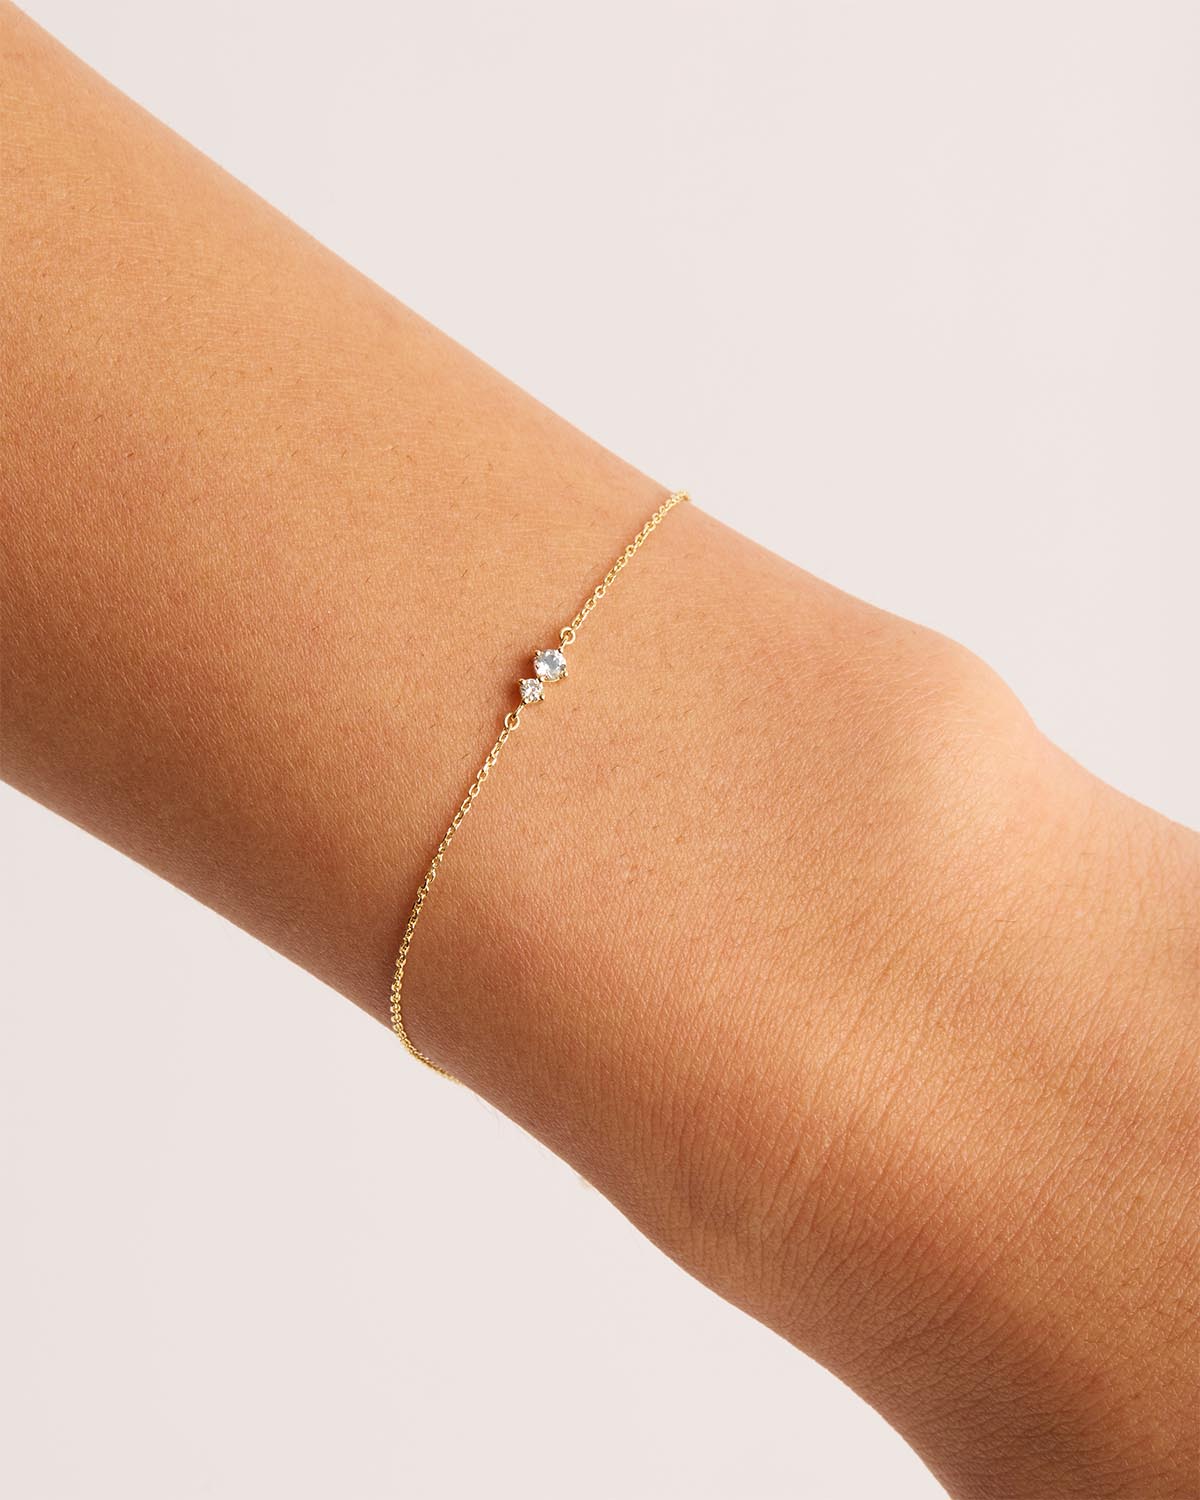 Amazon.com: Gold bracelet, dainty gold tone stainless steel chain bracelet,  waterproof bracelet, bridesmaids gift for her. minimalist jewelry, bridal :  Handmade Products